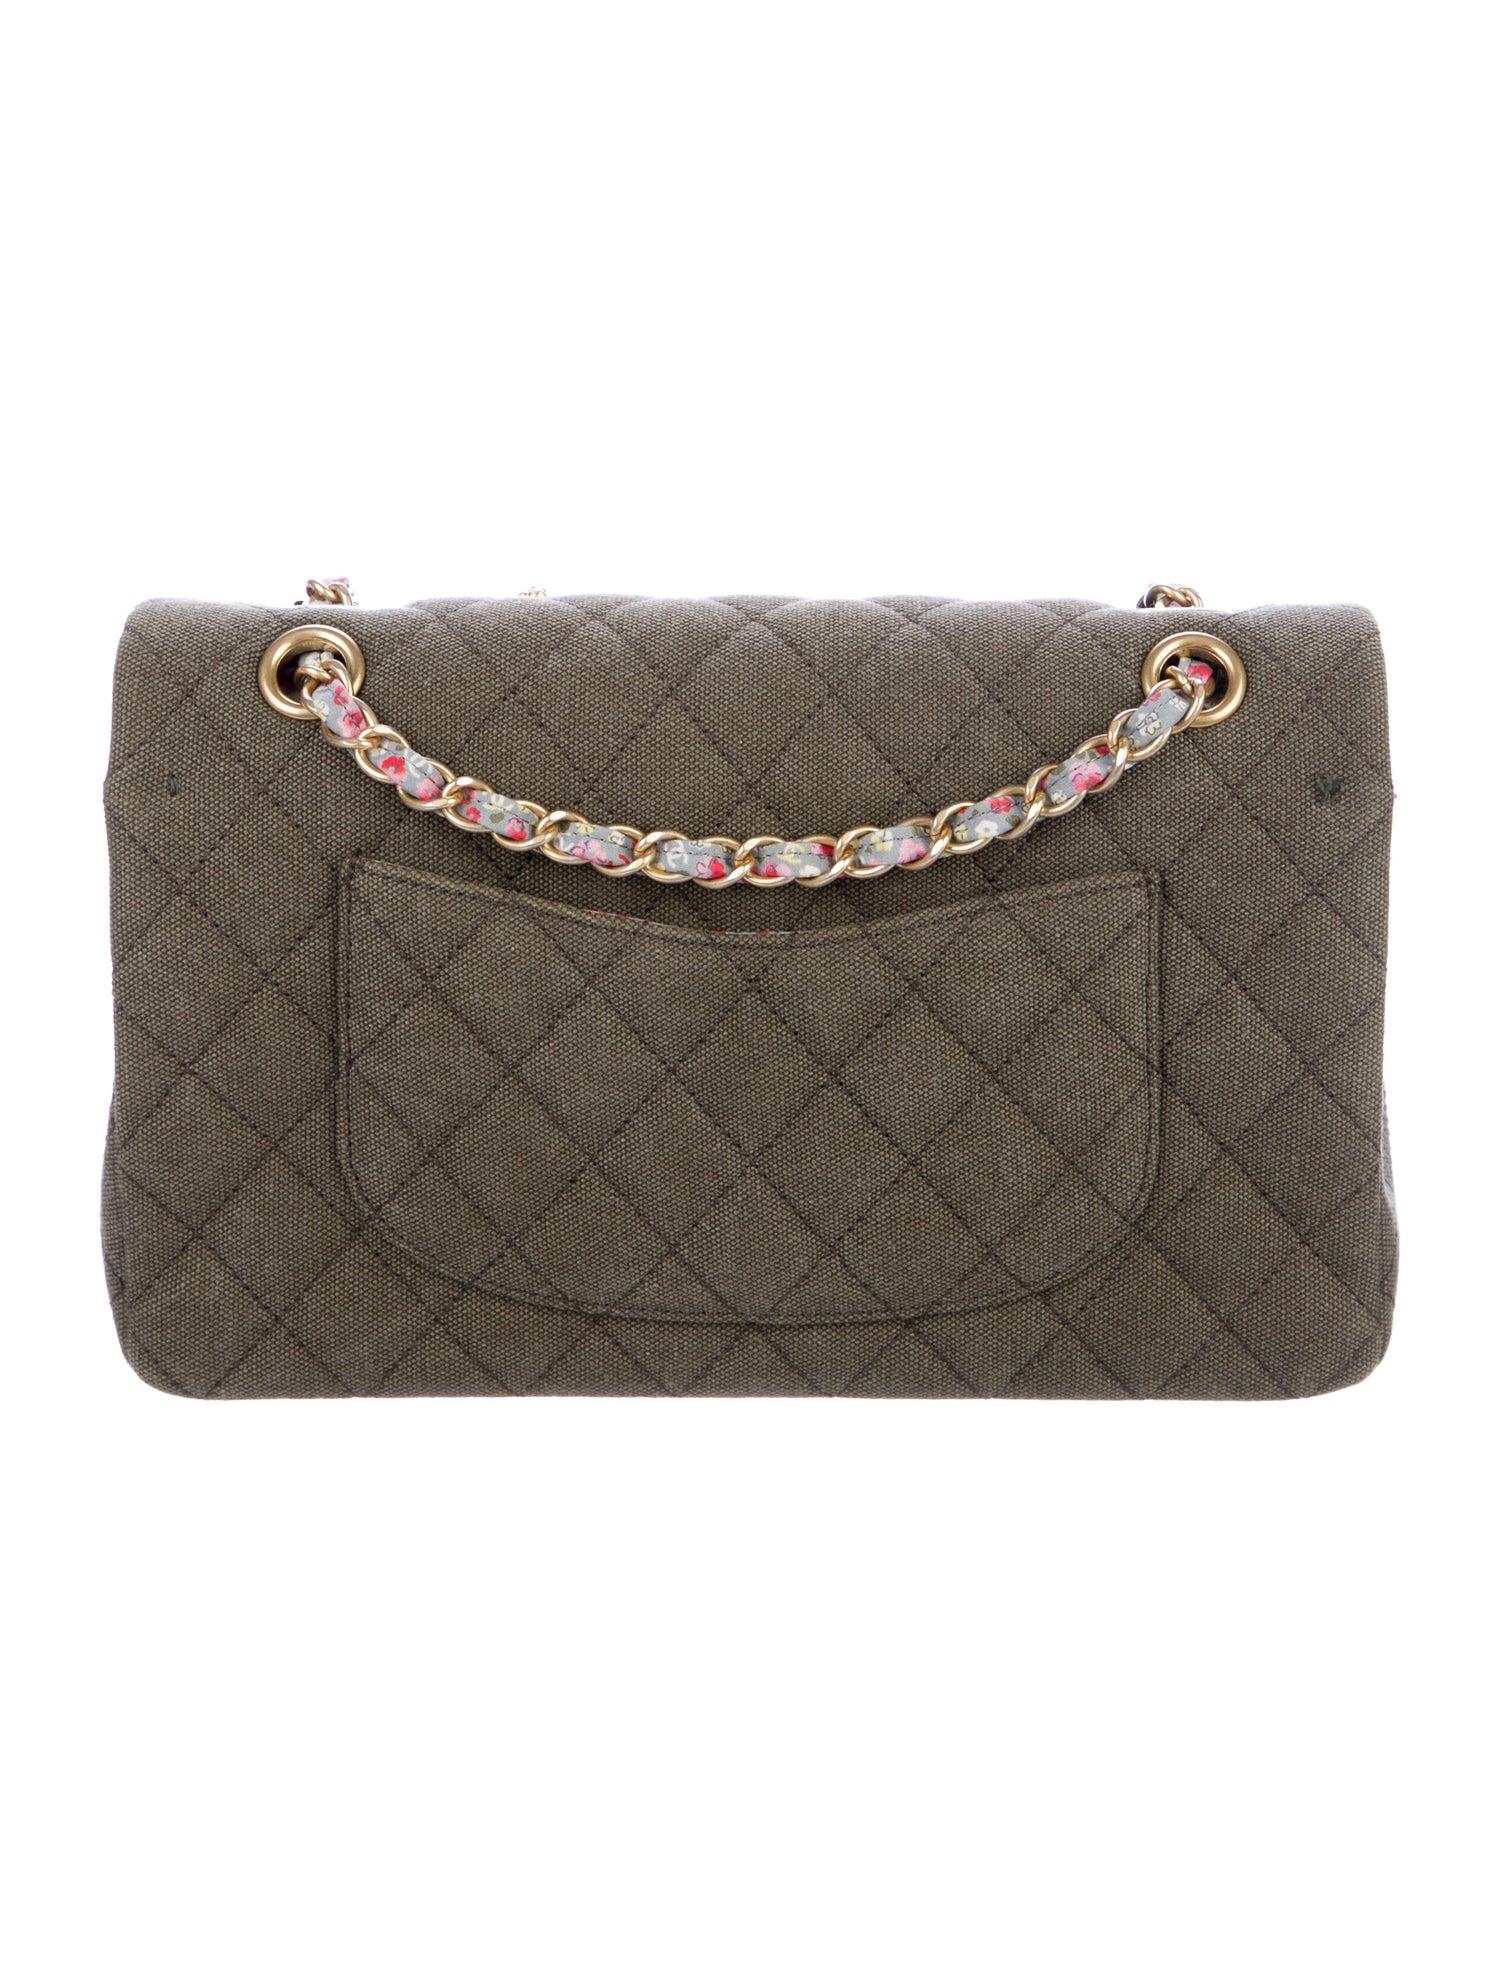 Chanel Green Quilted Fabric Gold Metal Charms Evening Shoulder Flap Bag

Quilted canvas 
Metal
Gold-tone hardware
Woven lining
Turn-lock closure 
Shoulder strap drop 16.5